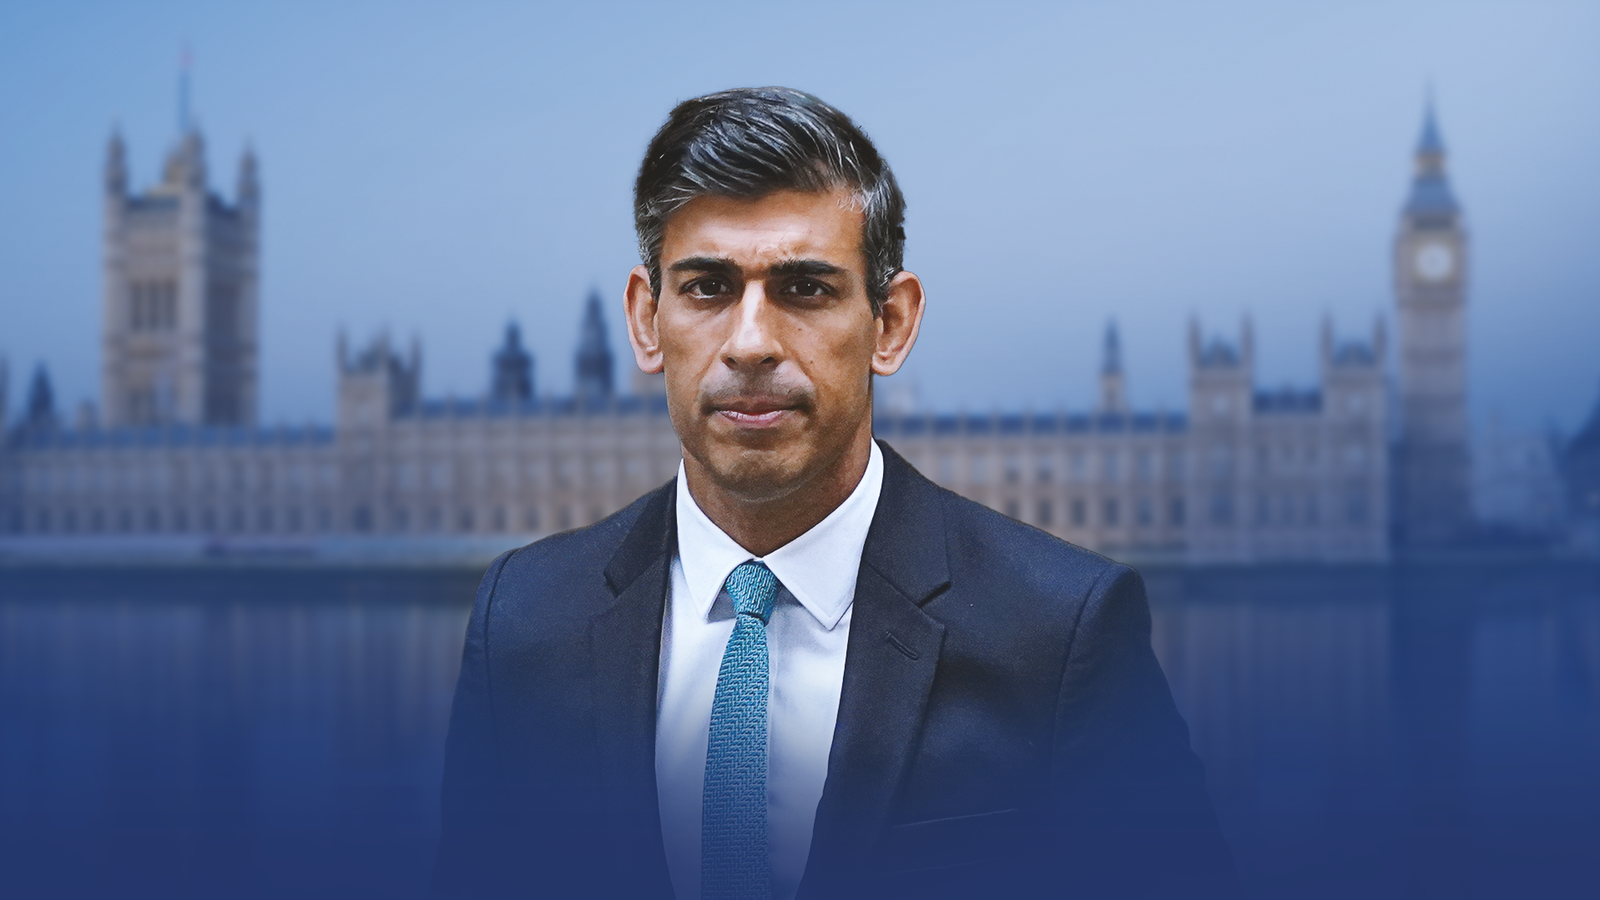 Beth Rigby: The Tories are struggling in the polls - can Team Rishi turn things around before the next election?